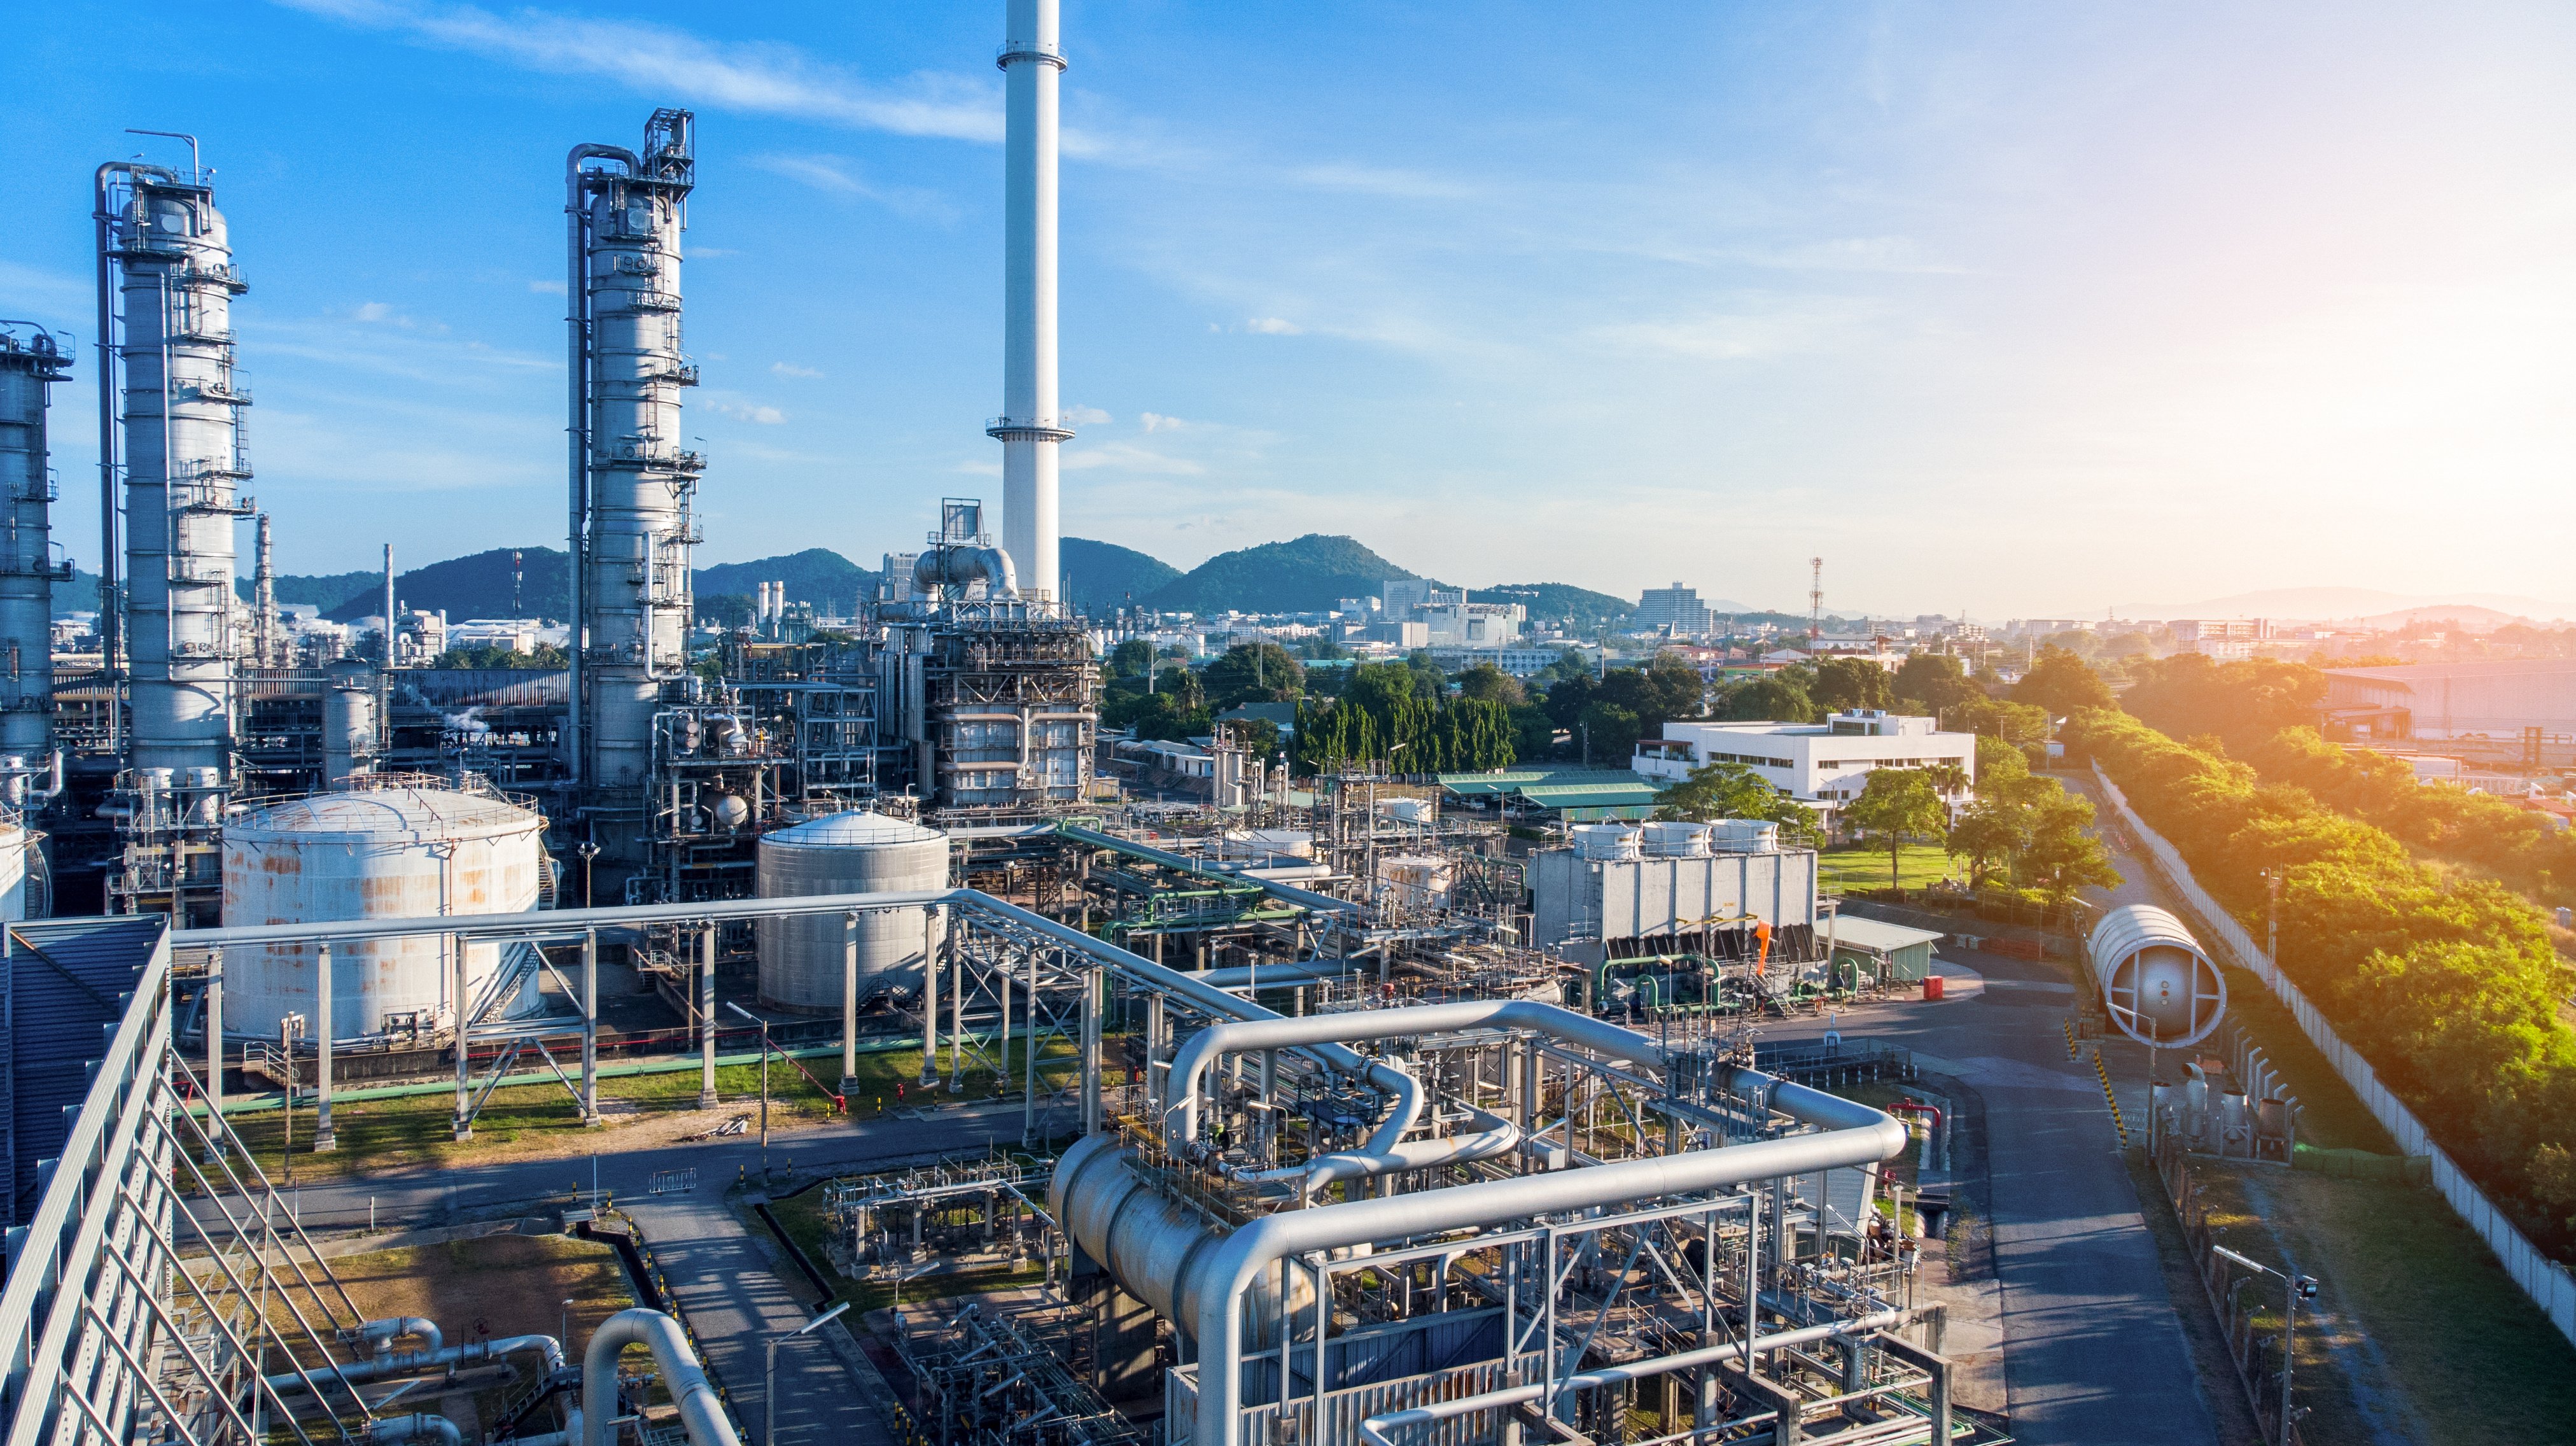 Figure 1: Chemical oil refinery plant. Source: Suphanat/Adobe Stock